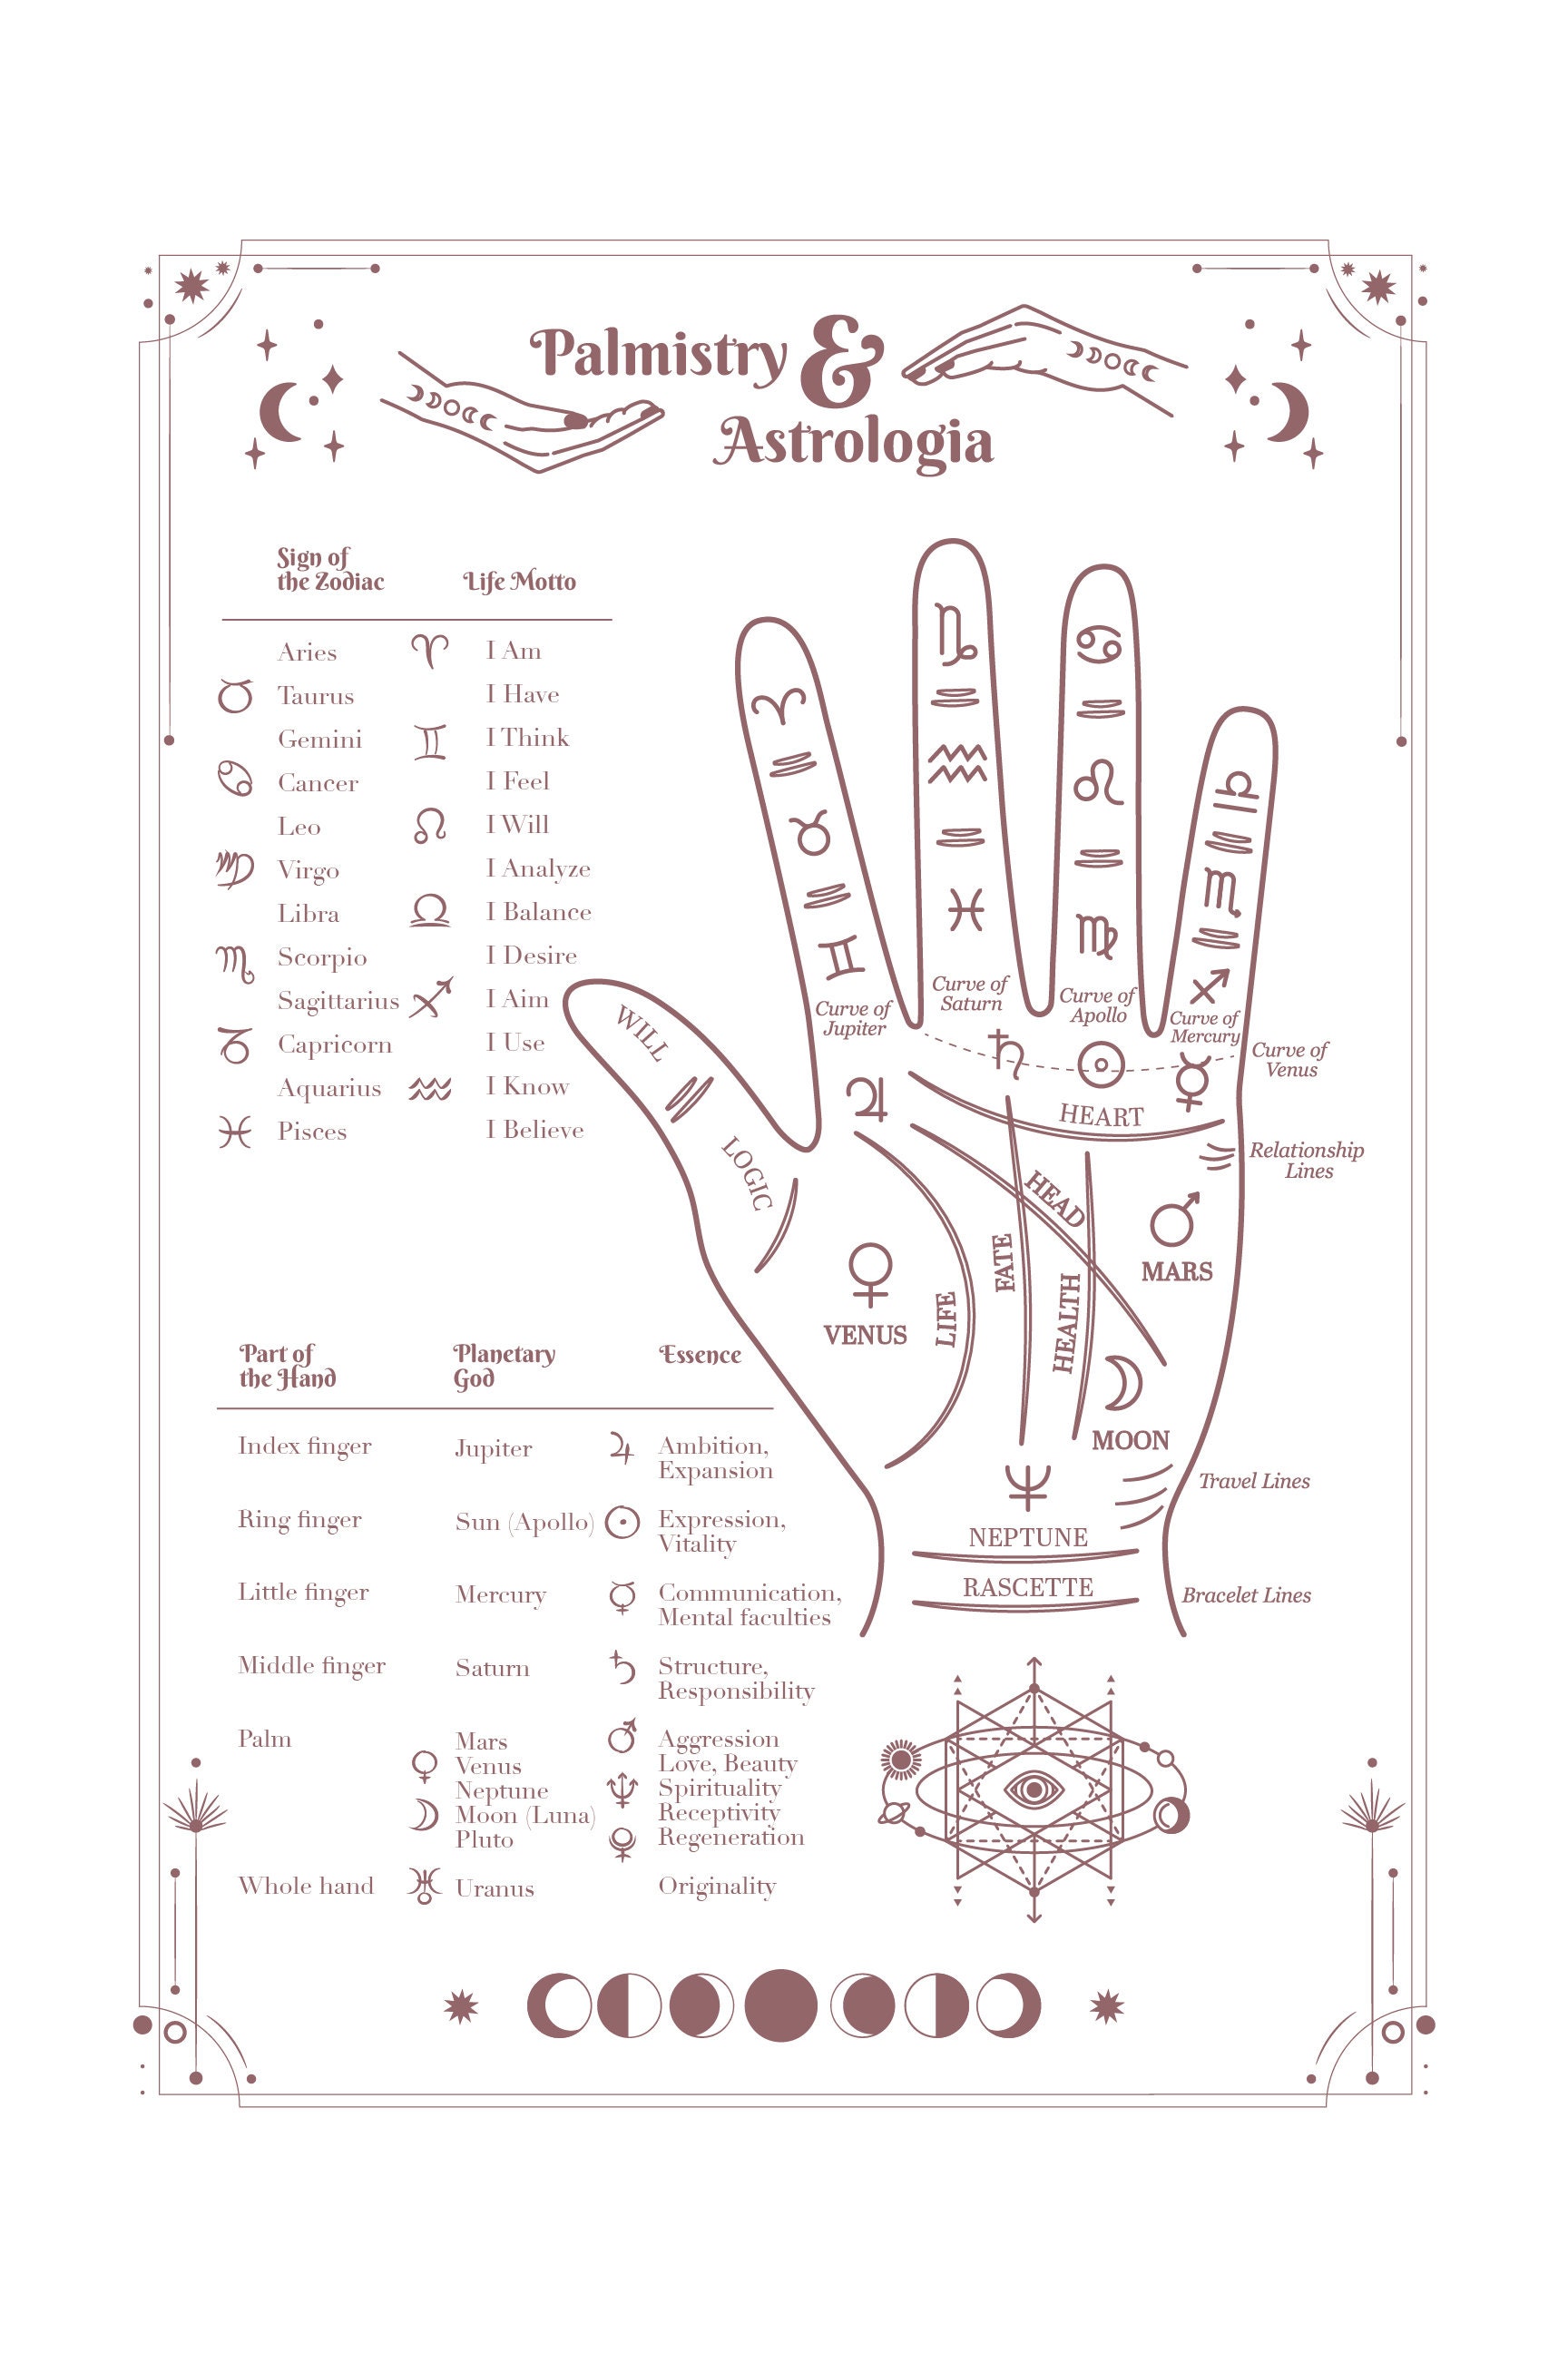 Palmistry Blog: Know Yourself Better